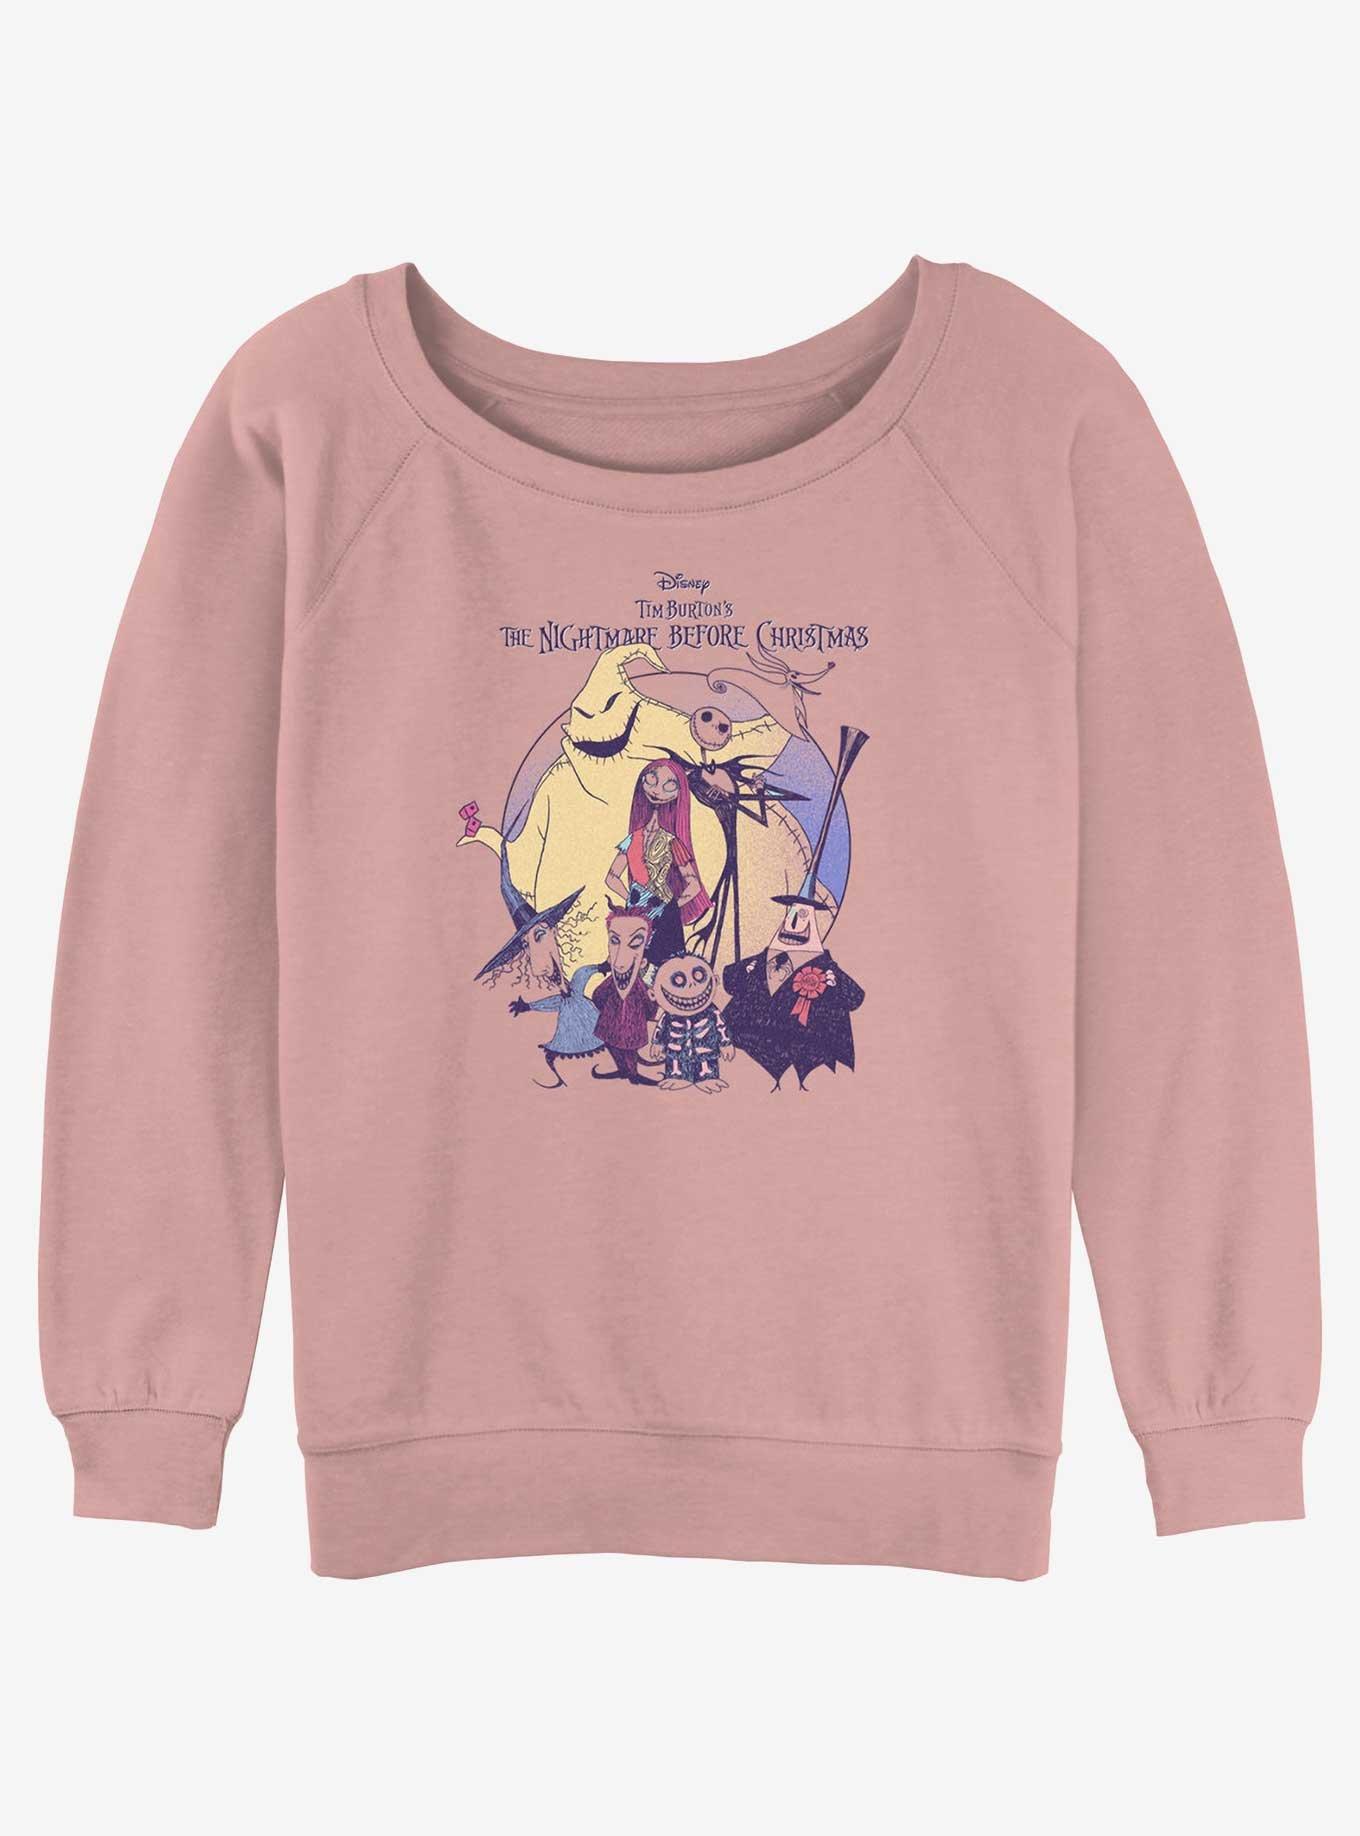 Disney The Nightmare Before Christmas Scary Squad Womens Slouchy Sweatshirt, DESERTPNK, hi-res